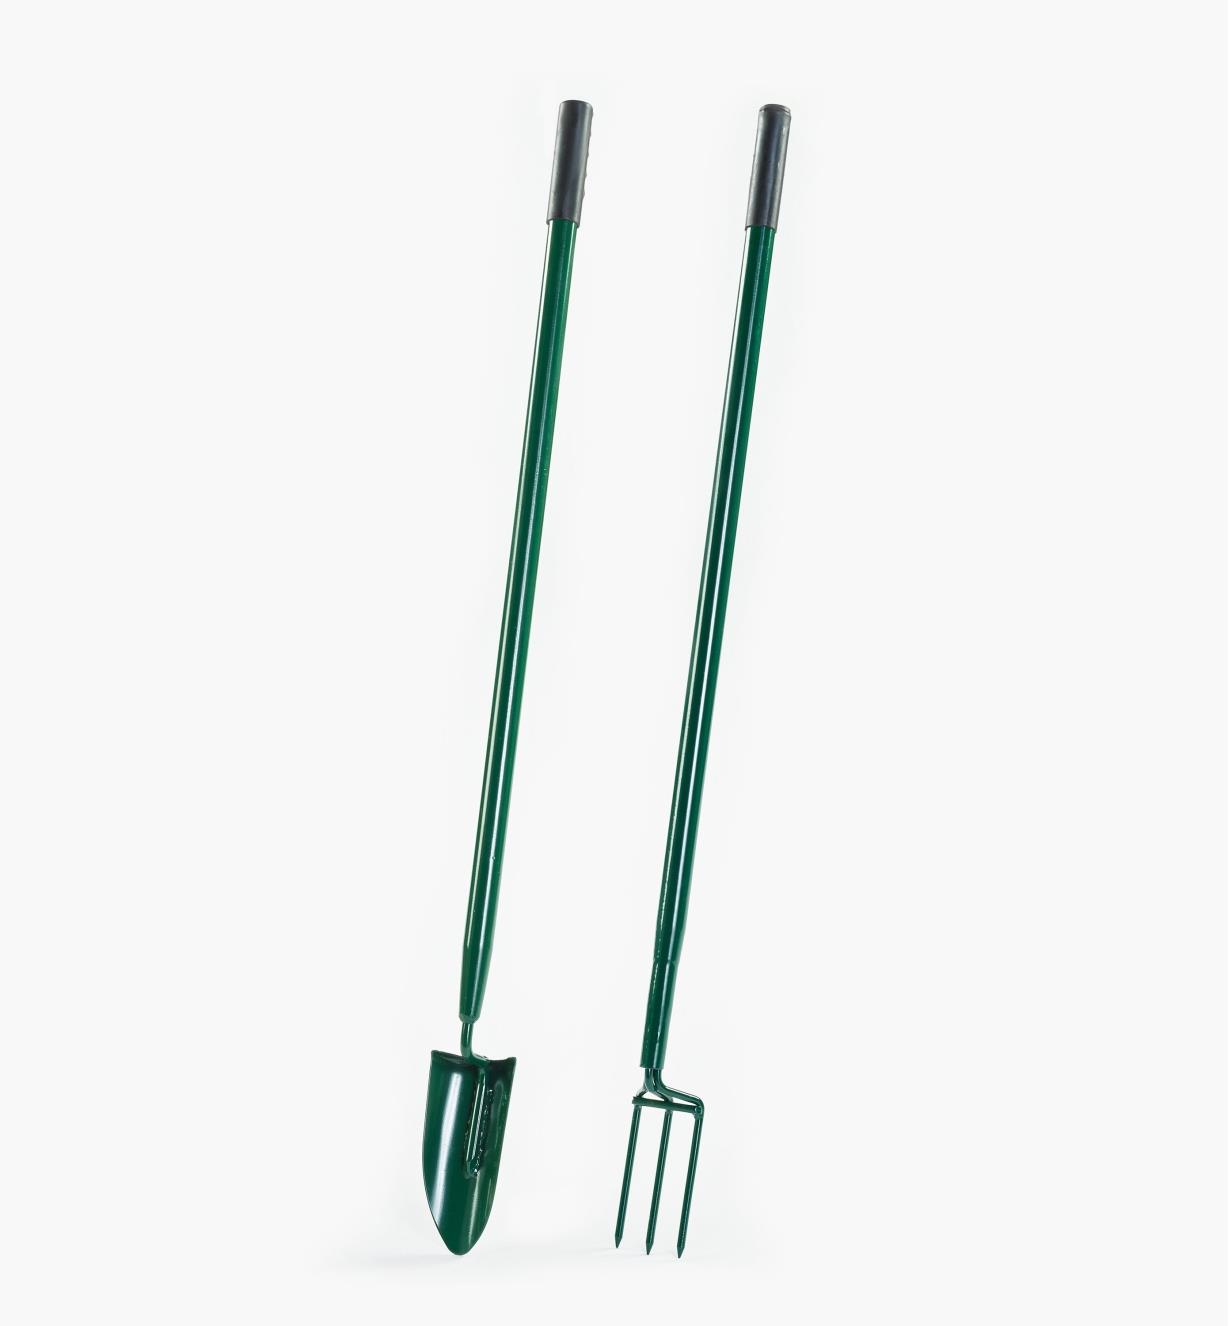 09A0459 - Micro-Spade and Micro-Fork Set